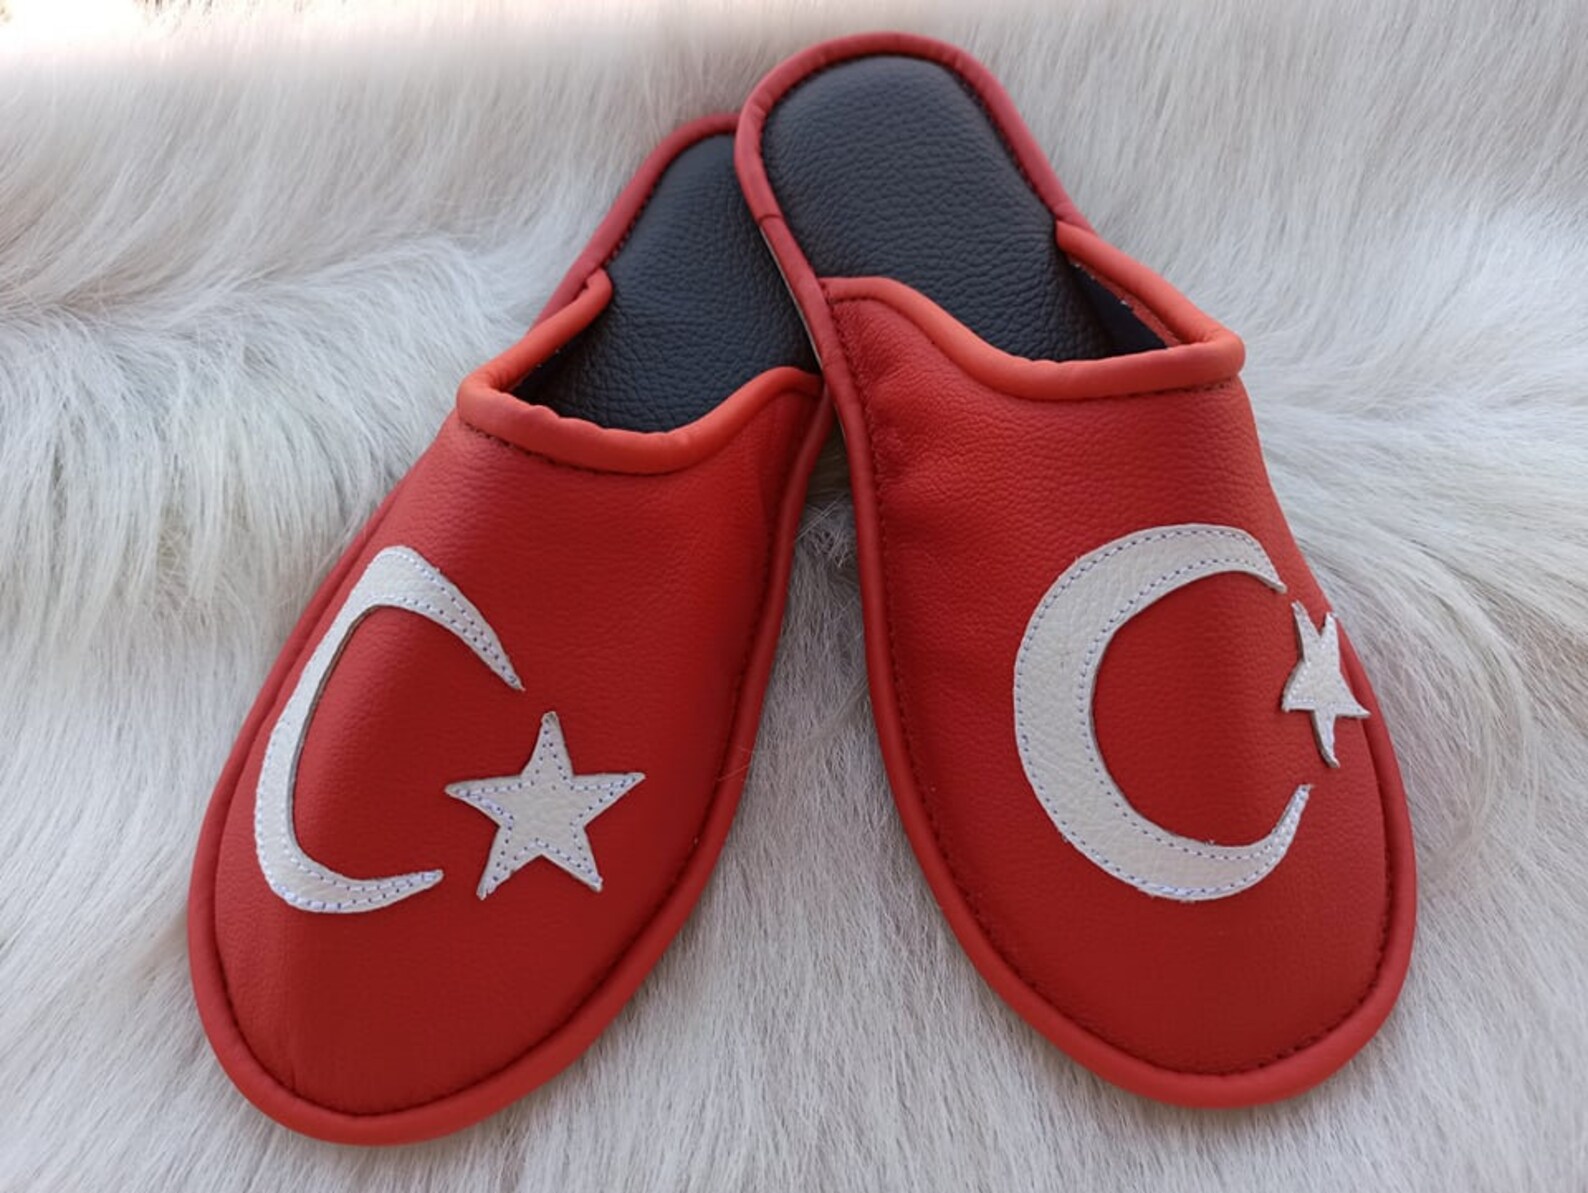 Turkish leather slippers Turkie flag slippers shoes gift for | Etsy